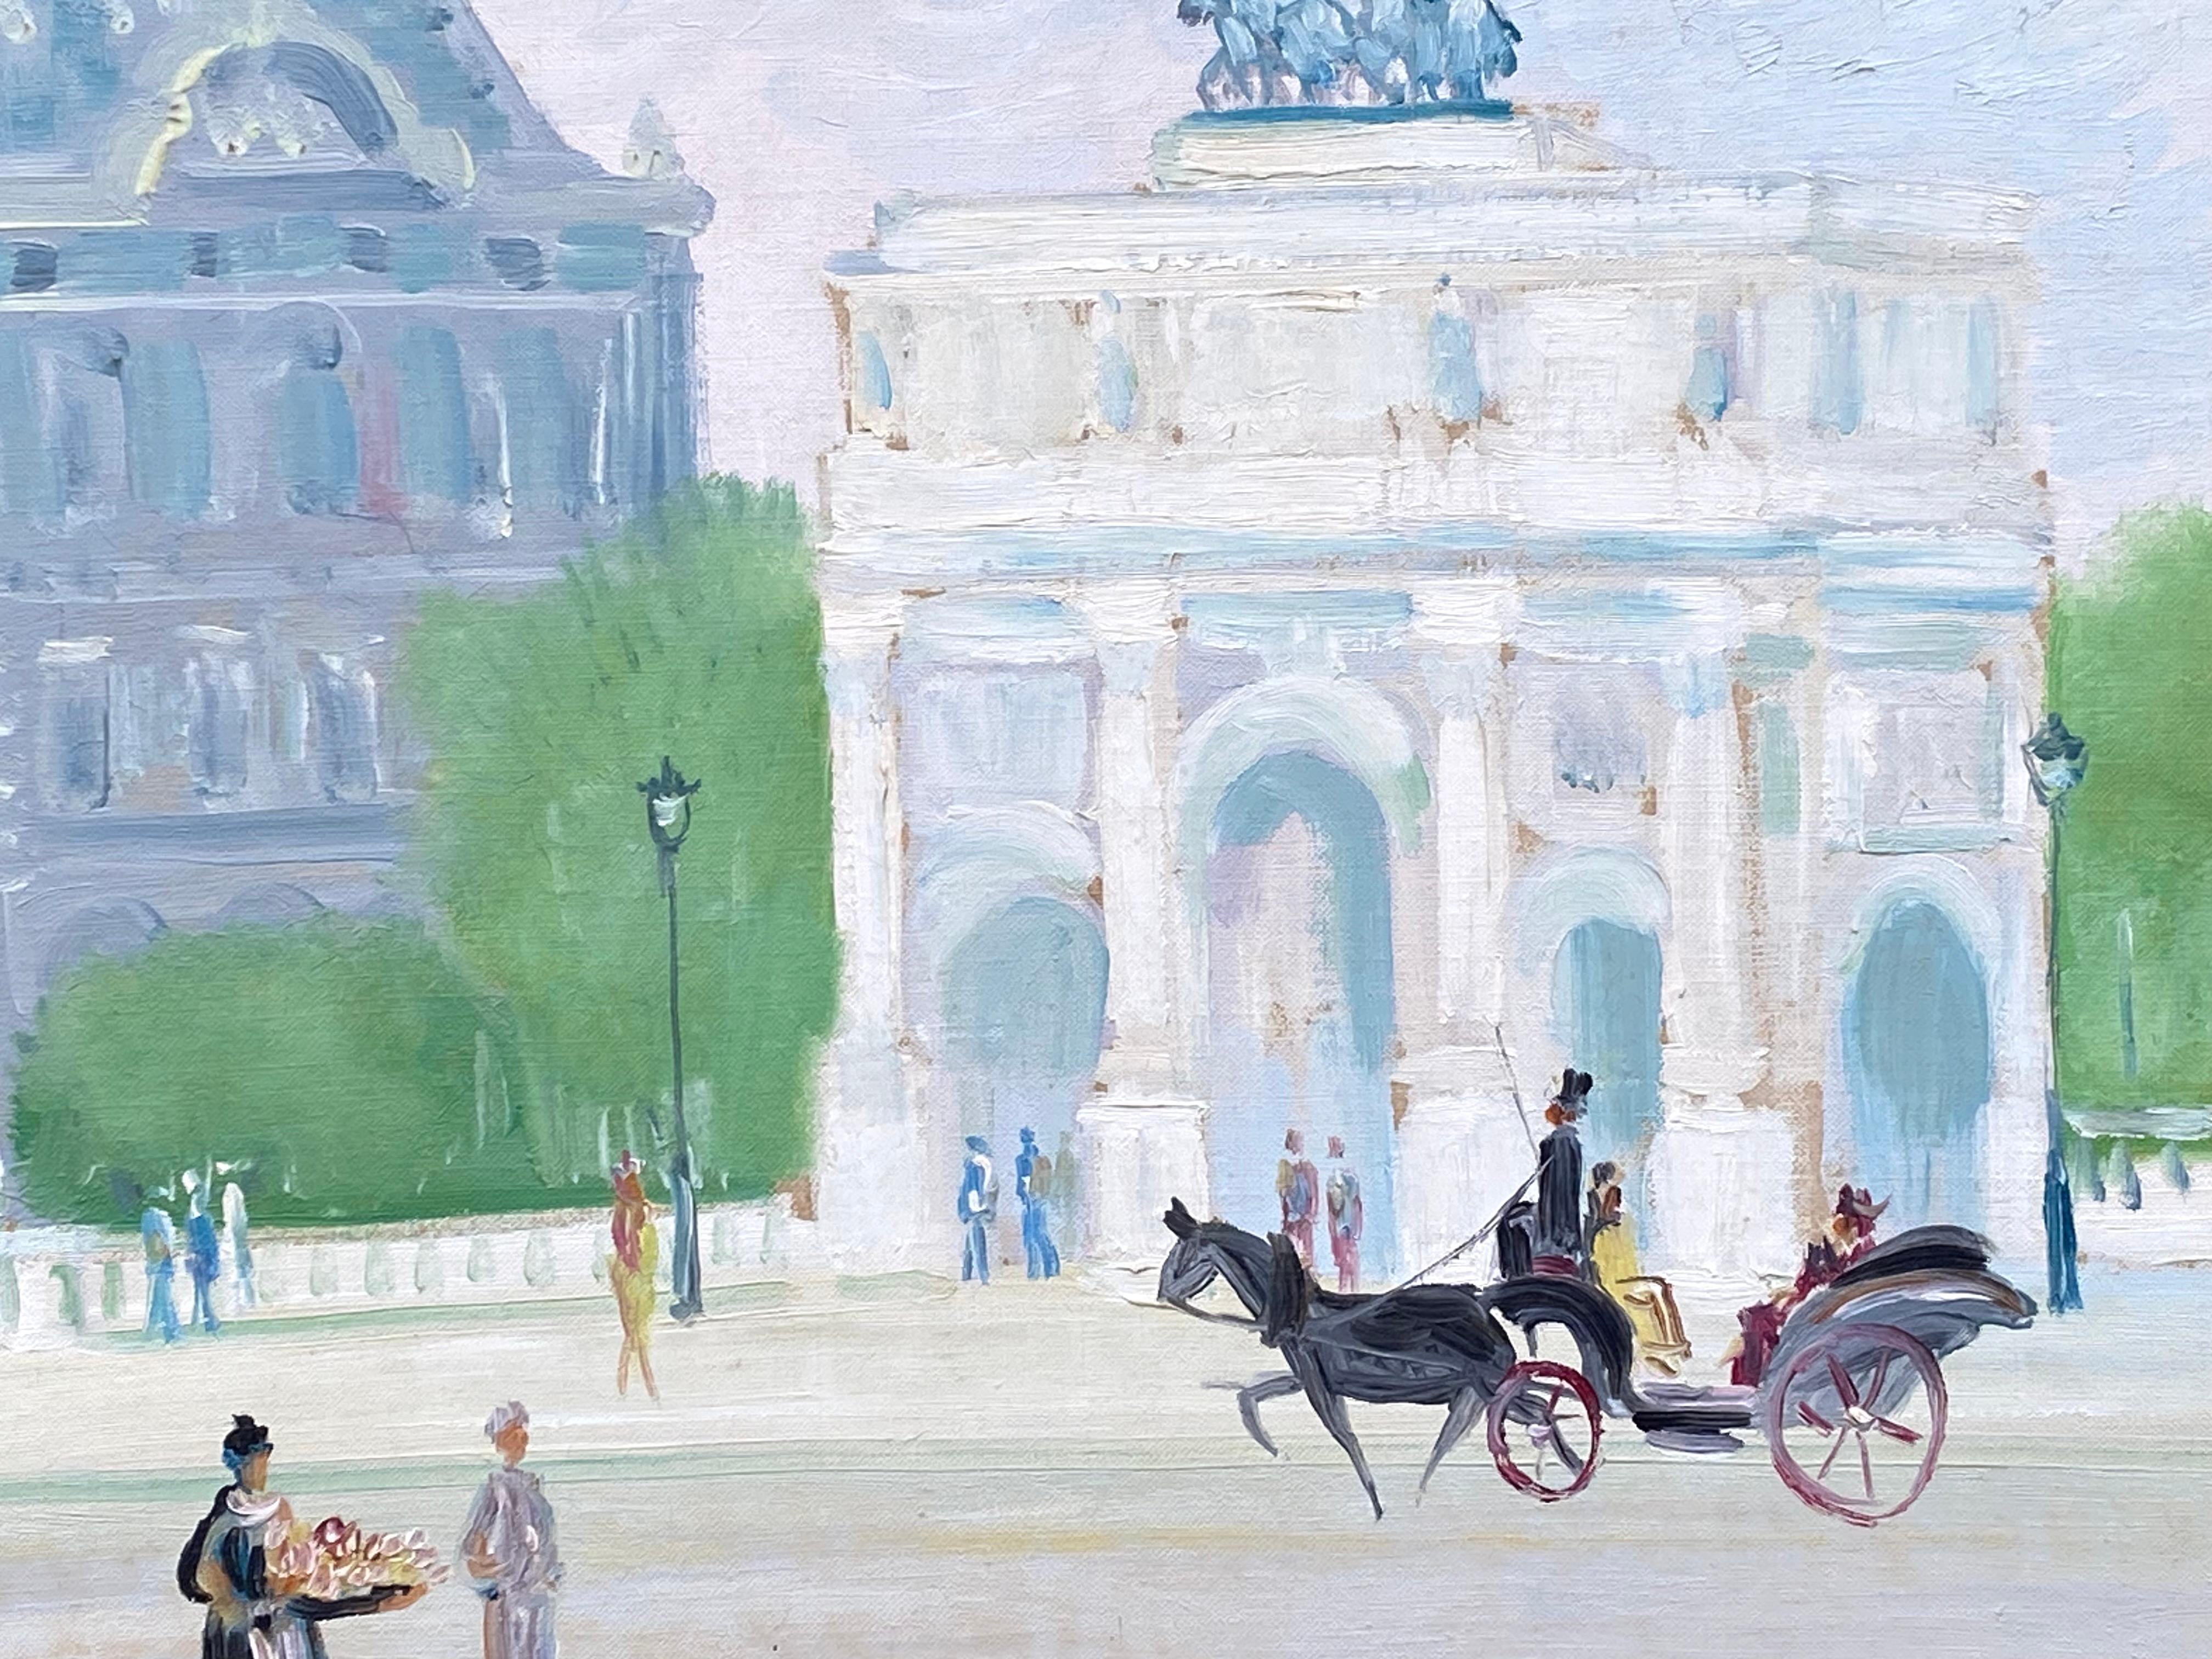 
Original oil on canvas painting of the Arc de Triomphe du Carrousel by the Dutch born artist Johannes Schiefer.  The Eiffel Tower appears in the distance. A whimsical take on Paris. Signed lower left. Condition is excellent. Framed in its original